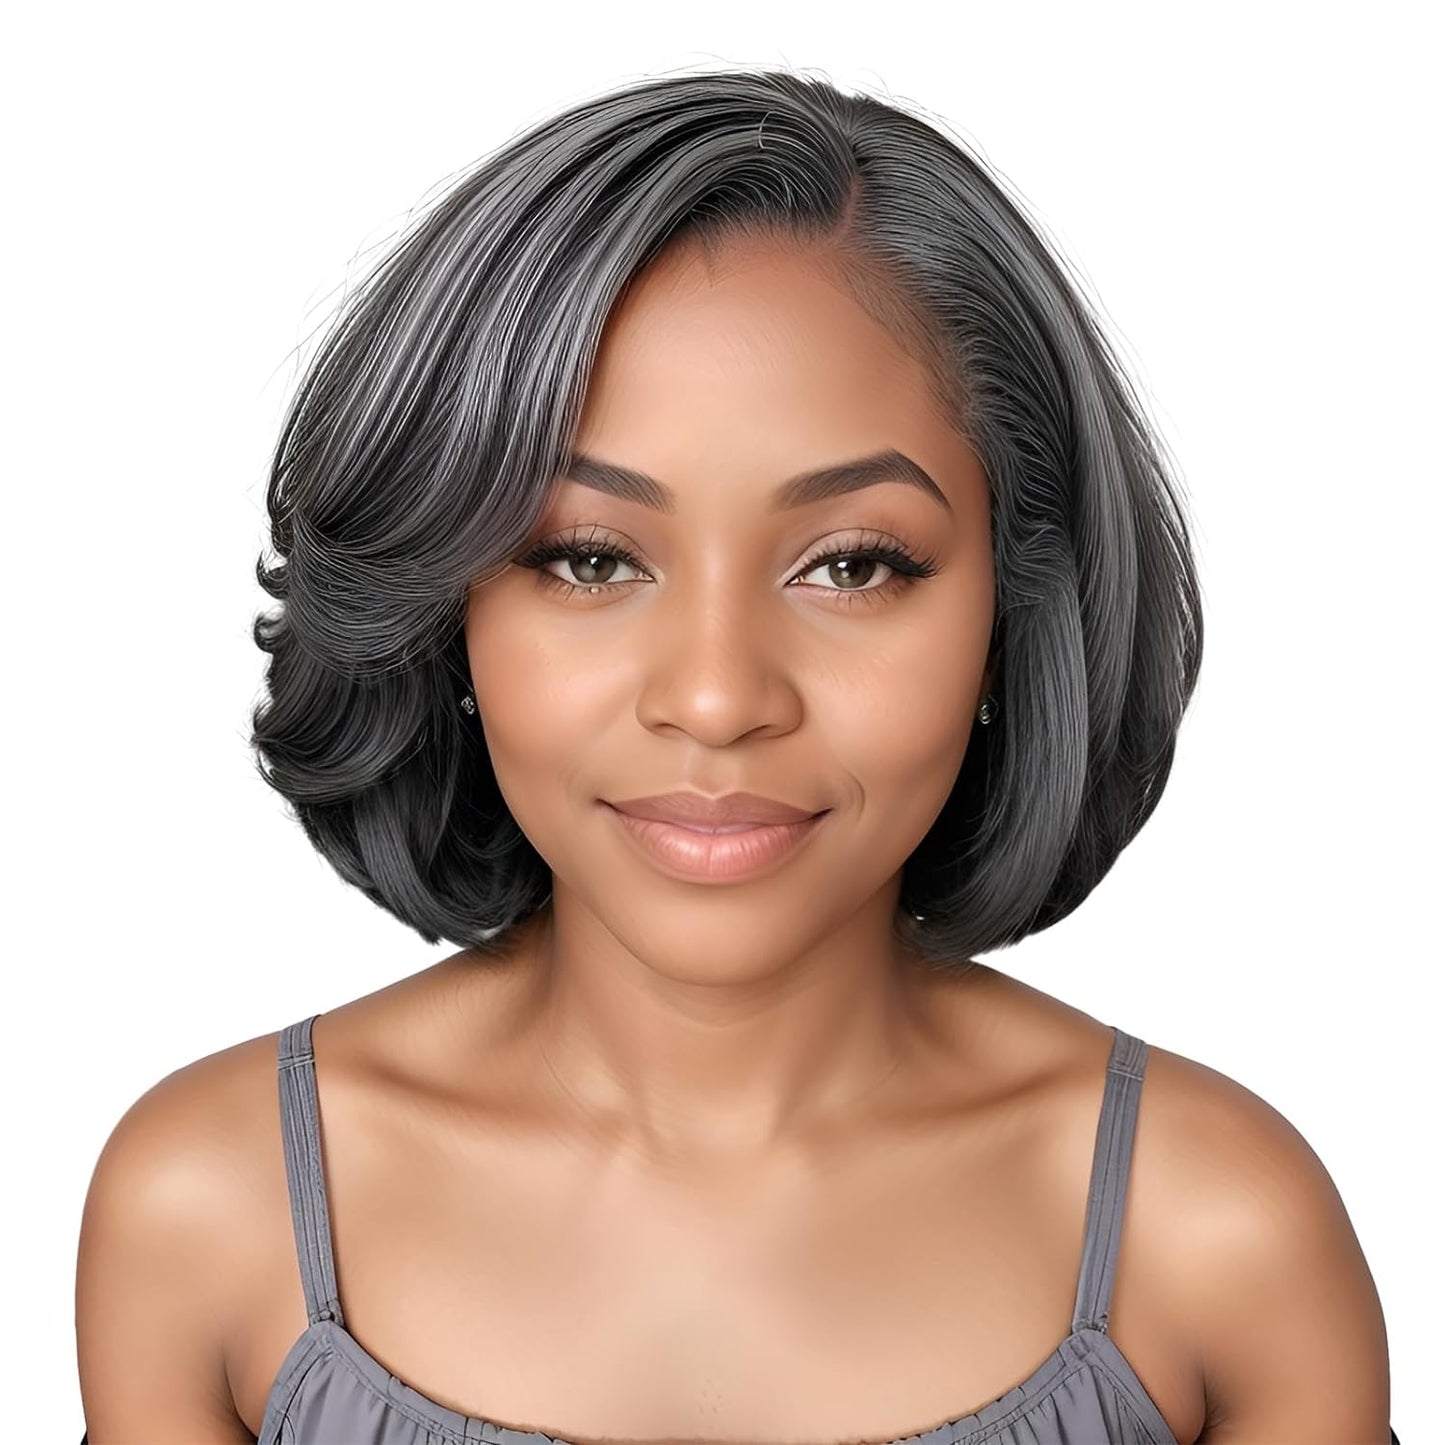 Salt and Pepper Wigs for Women 10" Wear and Go Glueless Bob Wigs Human Hair Pre Plucked Grey Short Bob Wig Body Wave Lace Front Wigs Pre Cut 5x5 Closure HD Transparent Glueless Wigs for Women